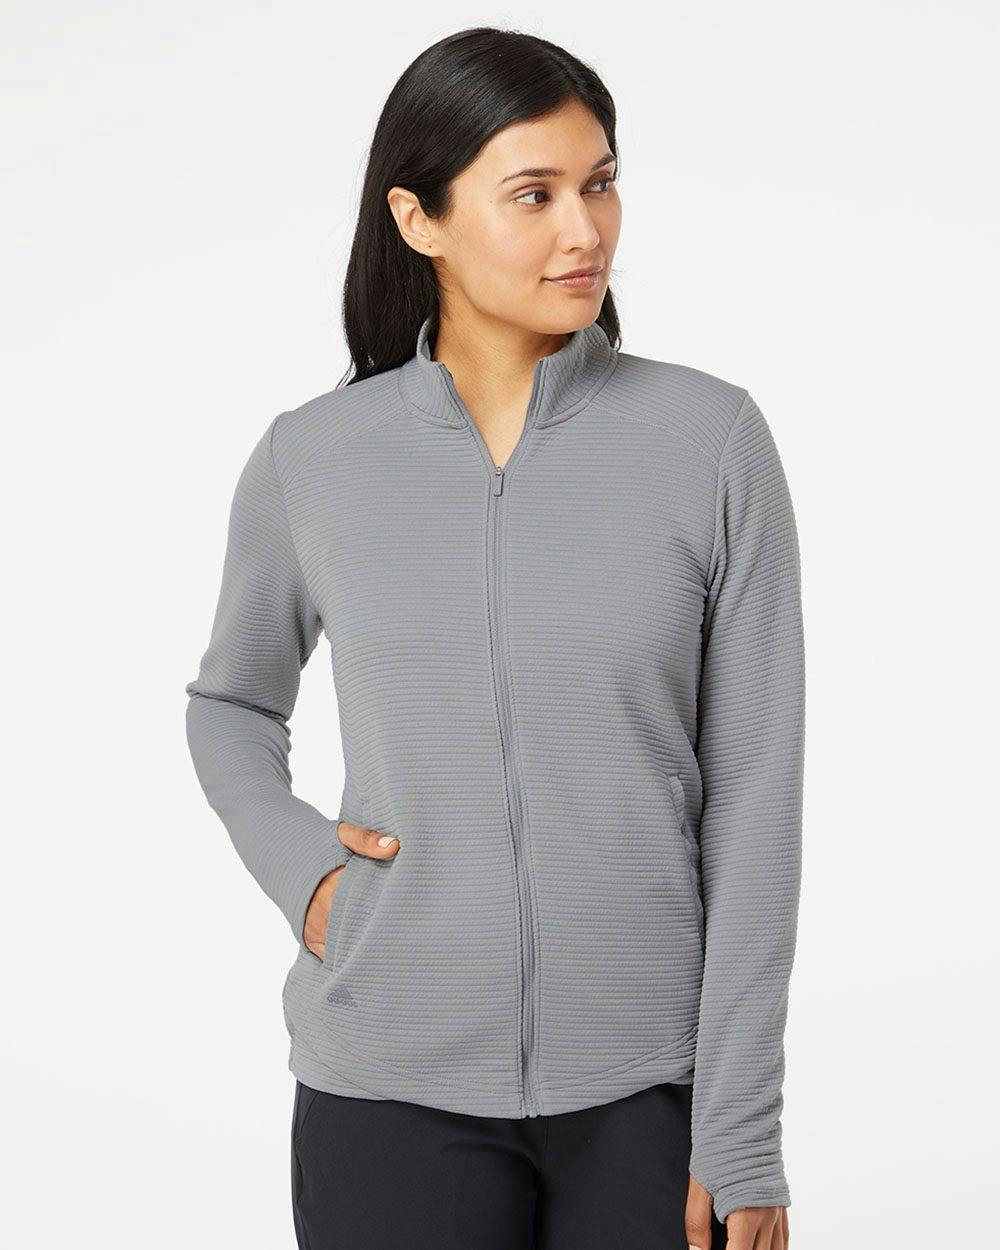 Image for Women's Textured Full-Zip Jacket - A416